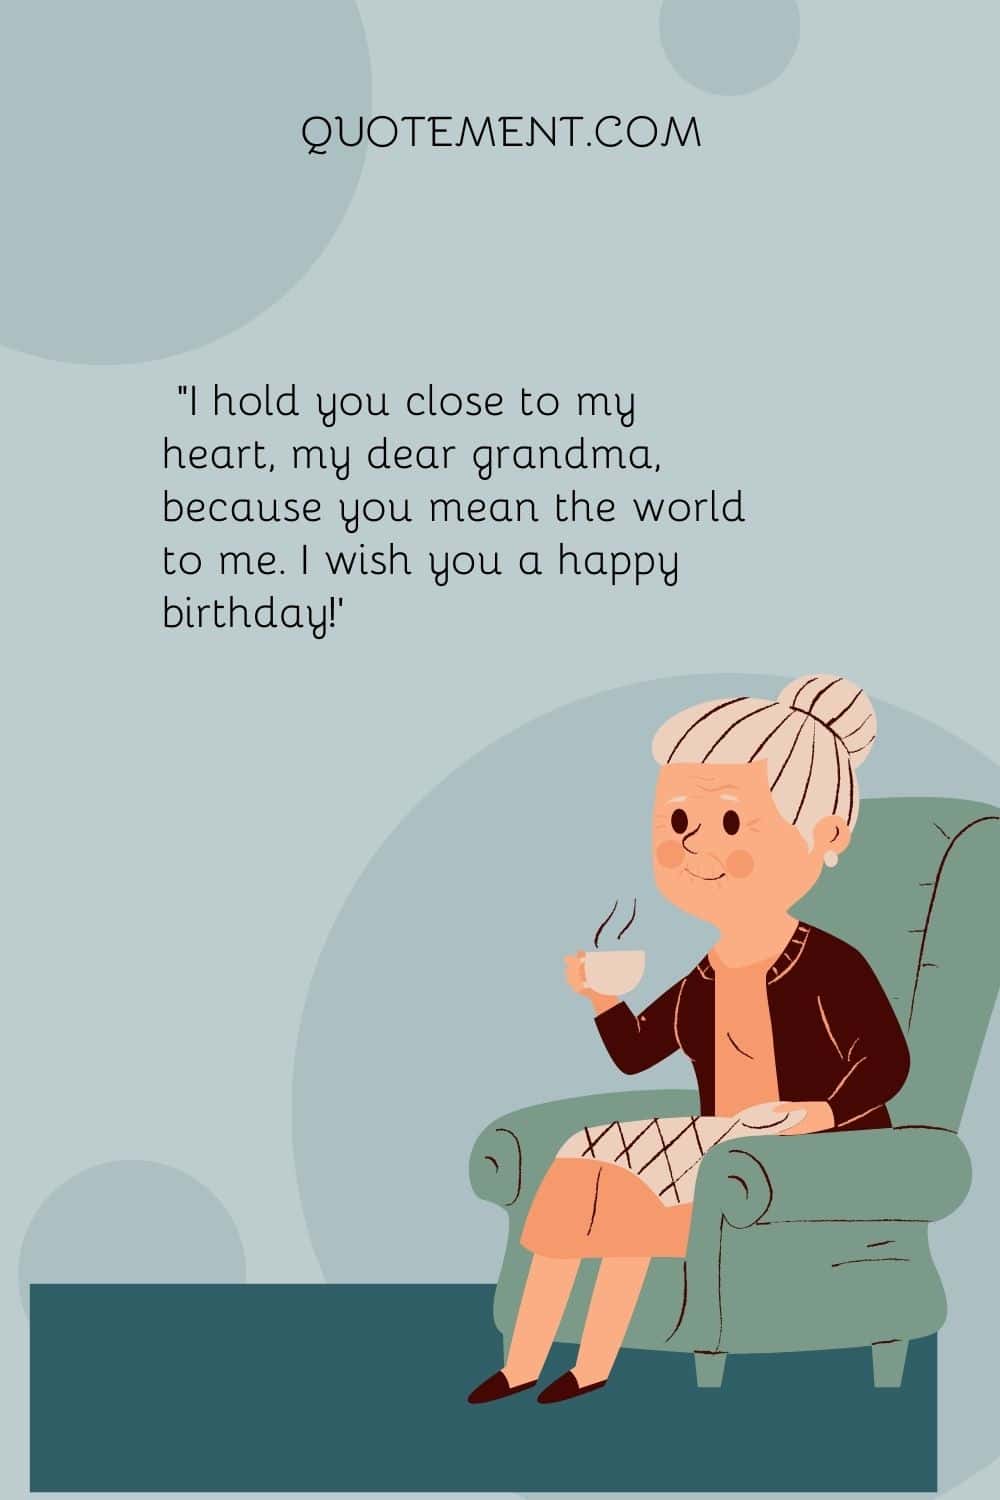 I hold you close to my heart, my dear grandma, because you mean the world to me